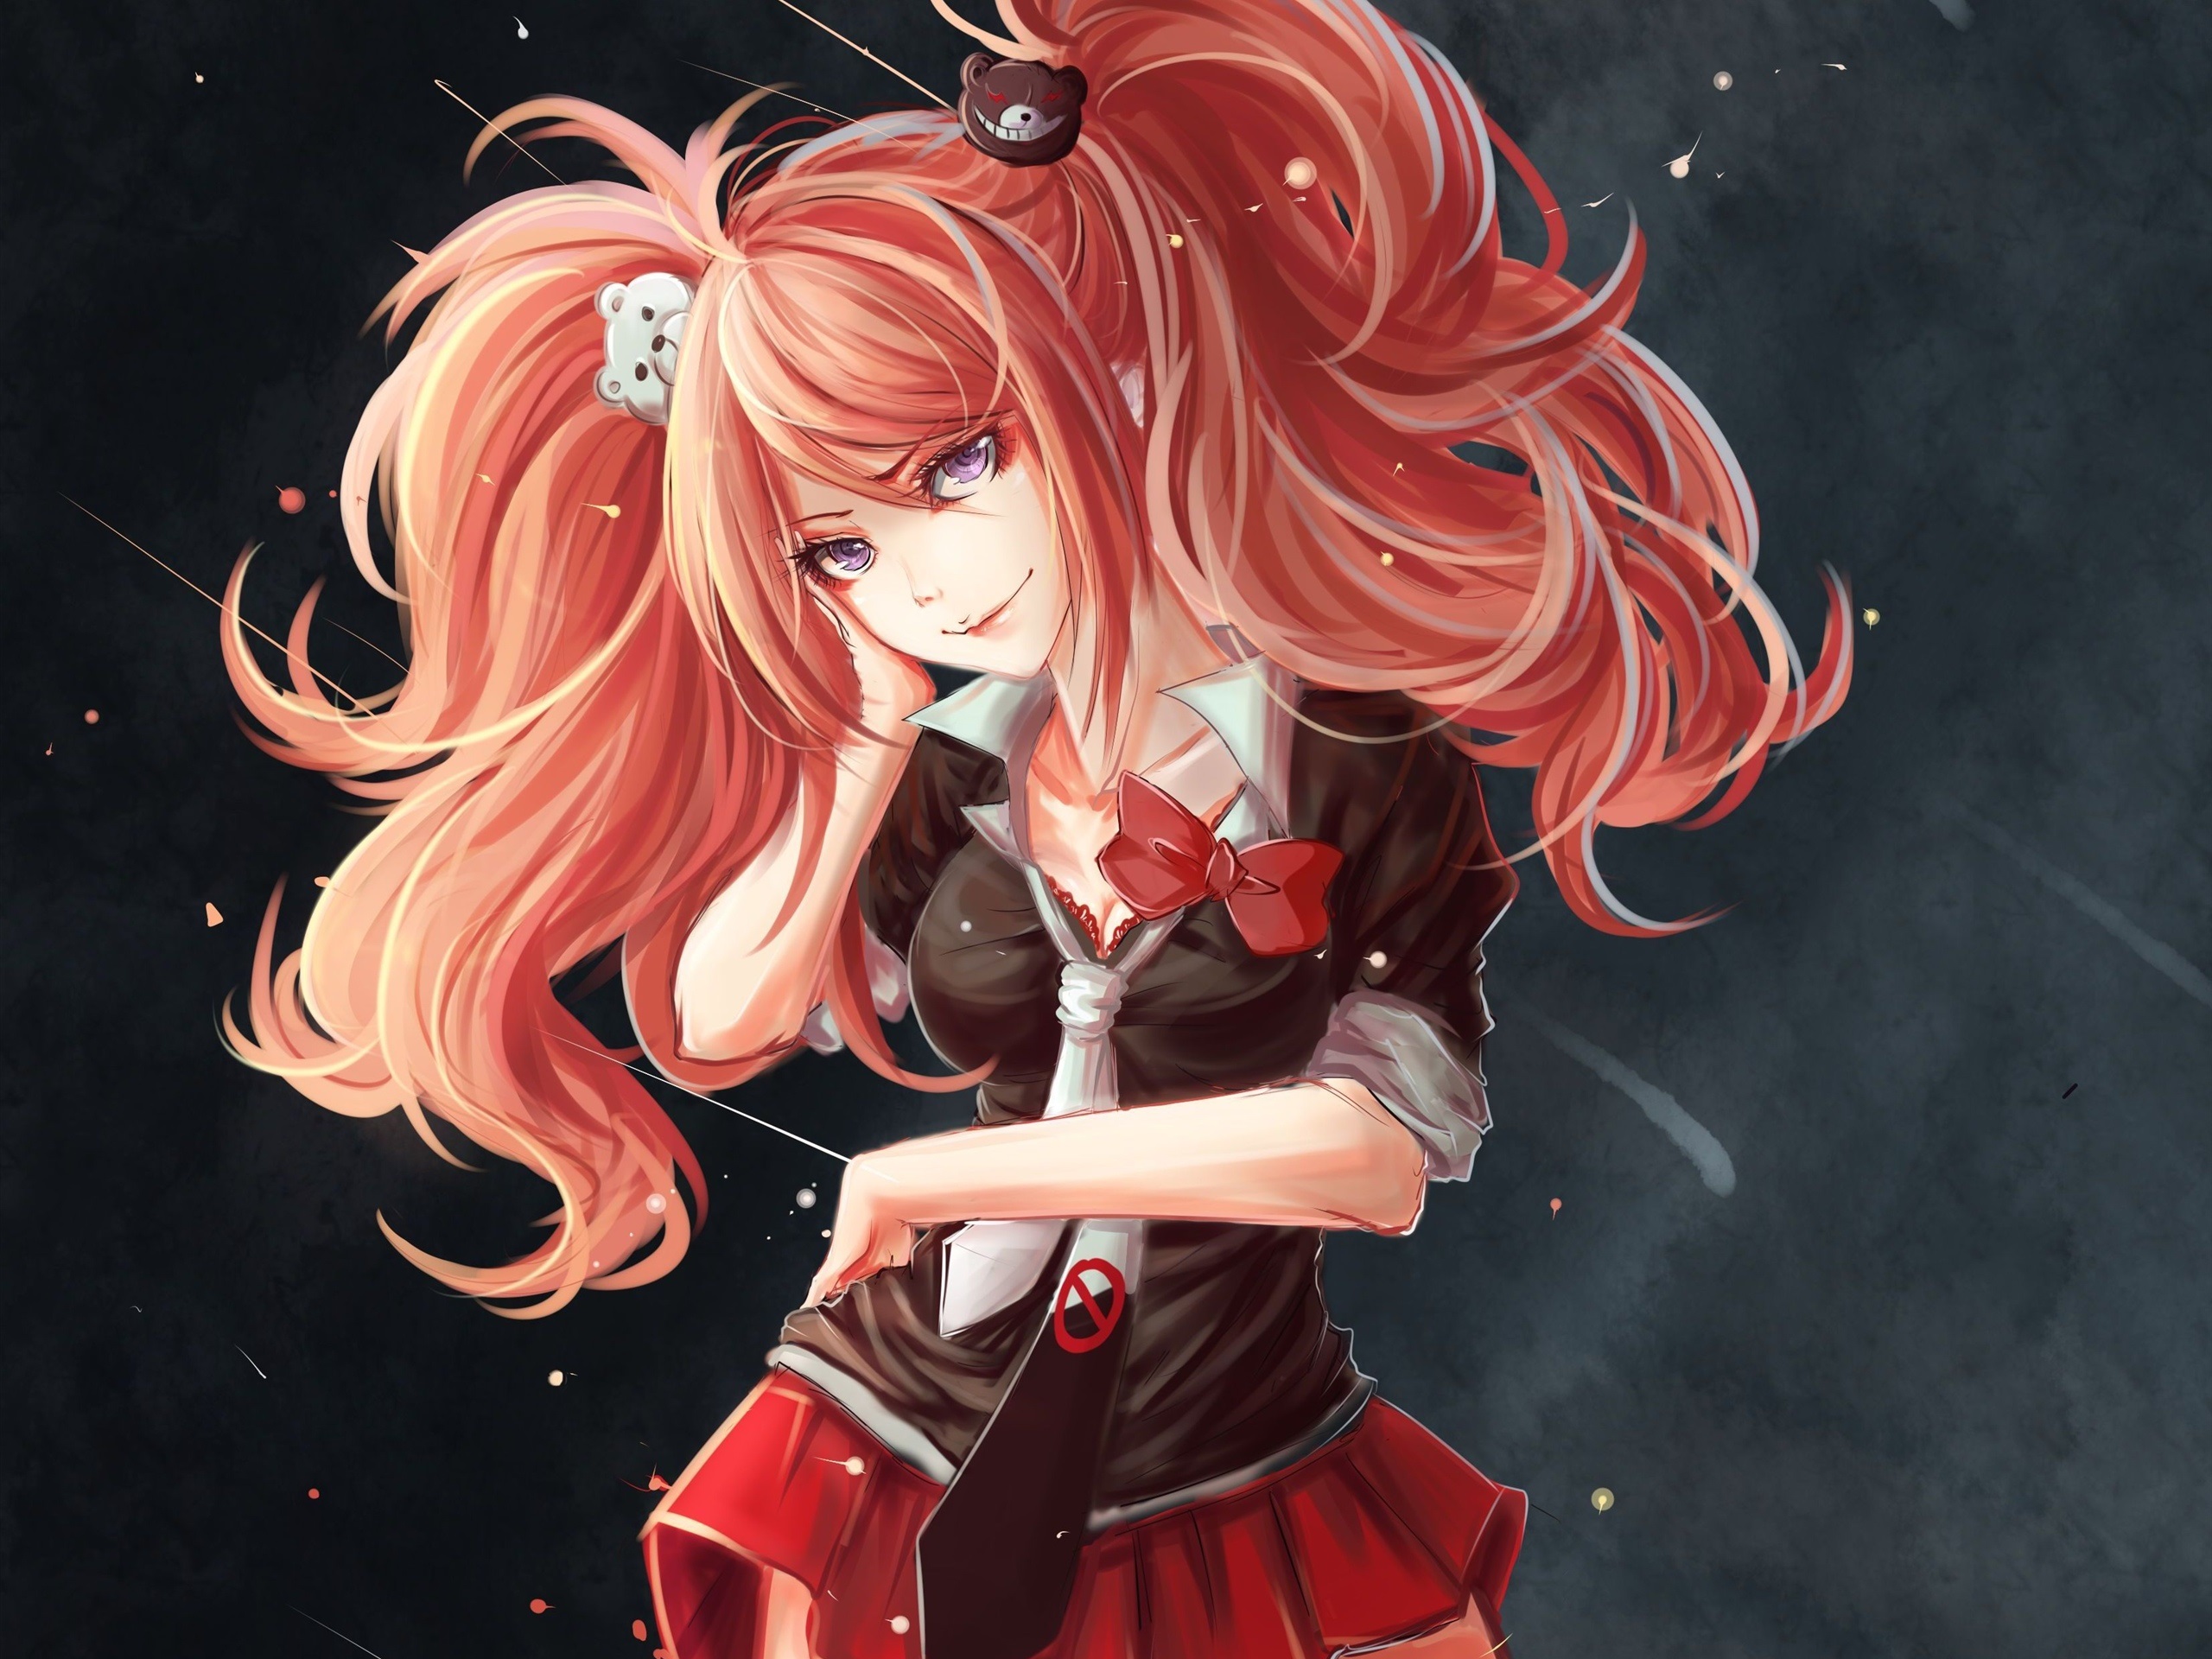 Download wallpaper for 320x240 resolution | Beautiful anime girl, pink